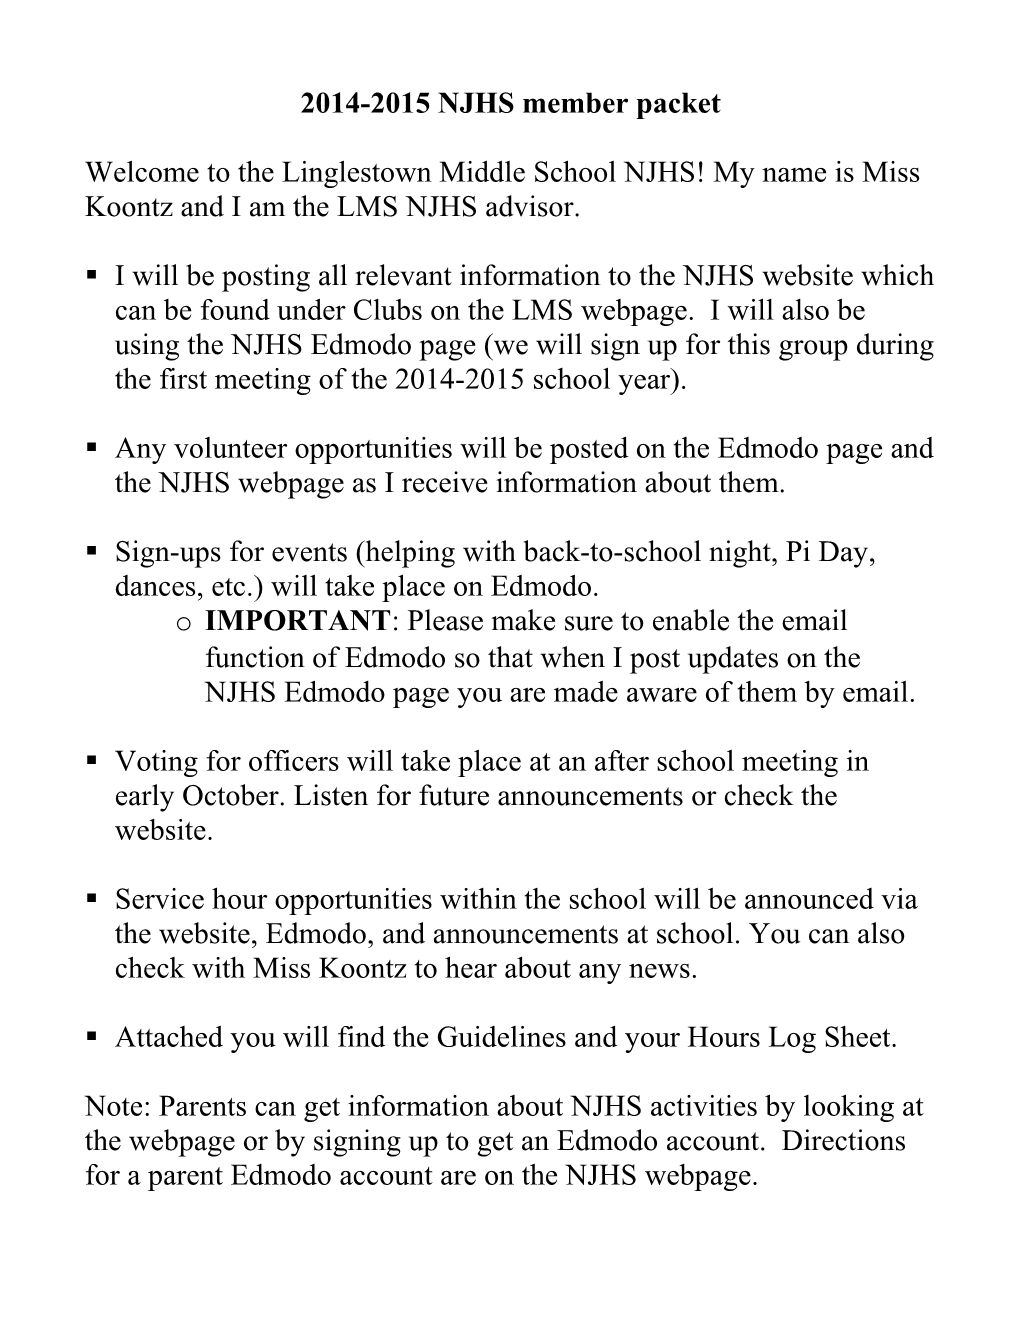 2013 Current NJHS Member Packet